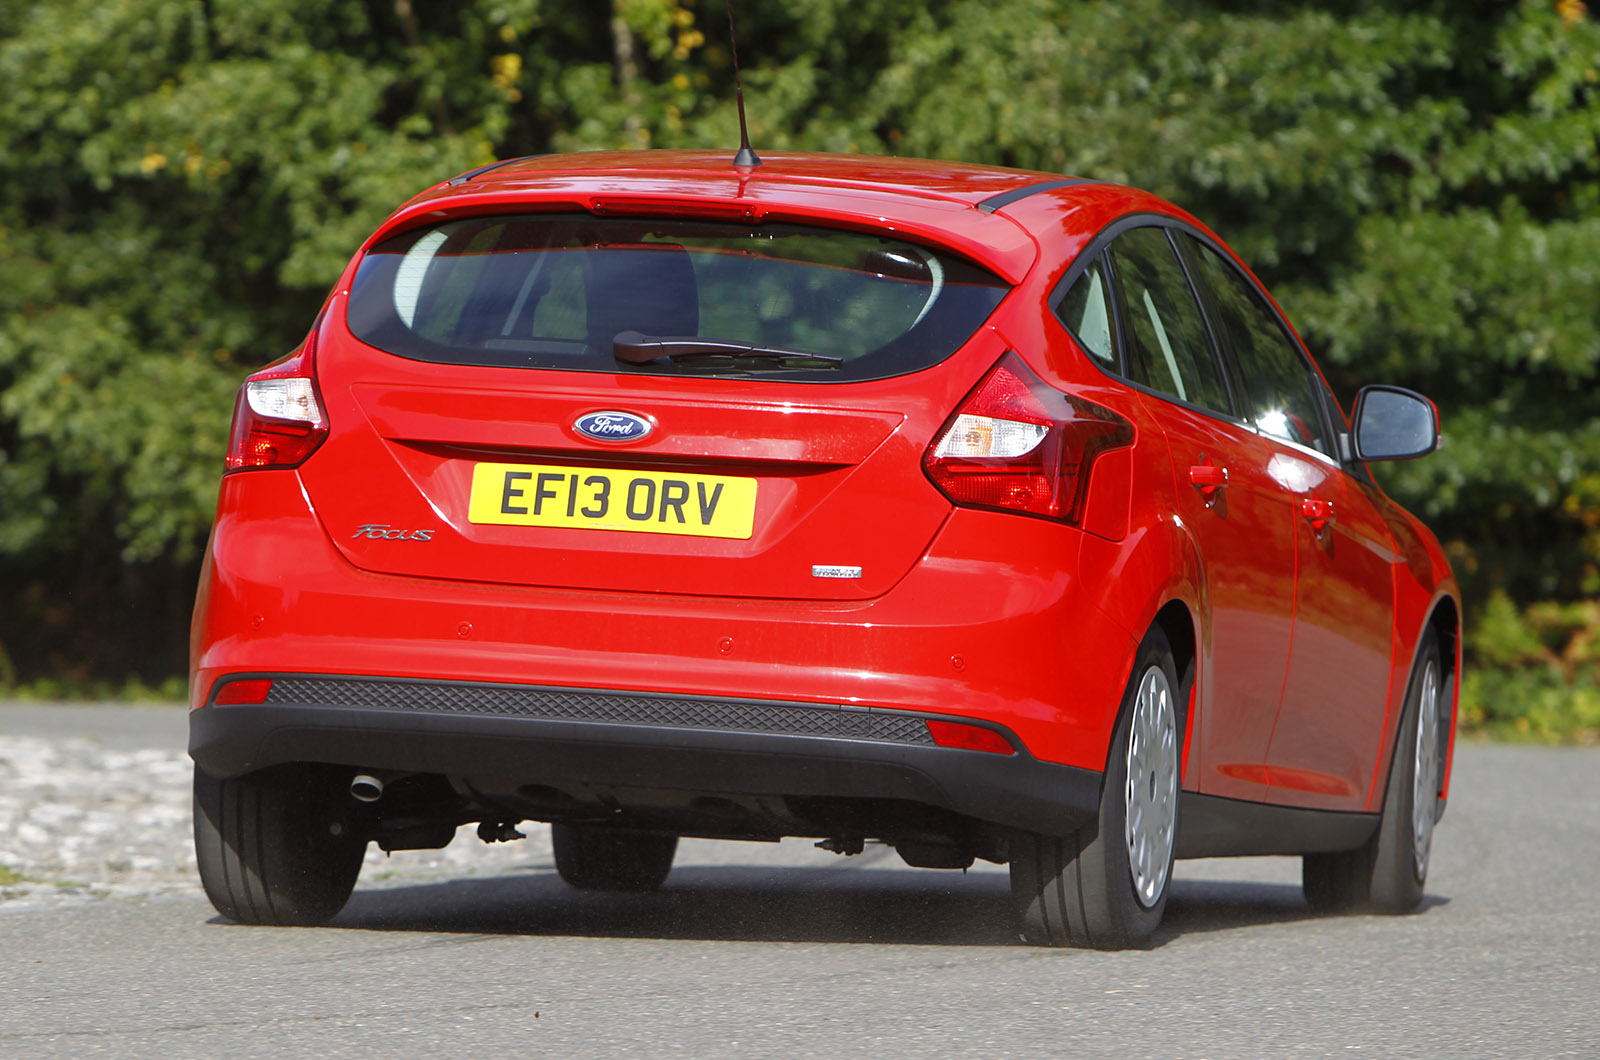 Ford focus tdci econetic review #6